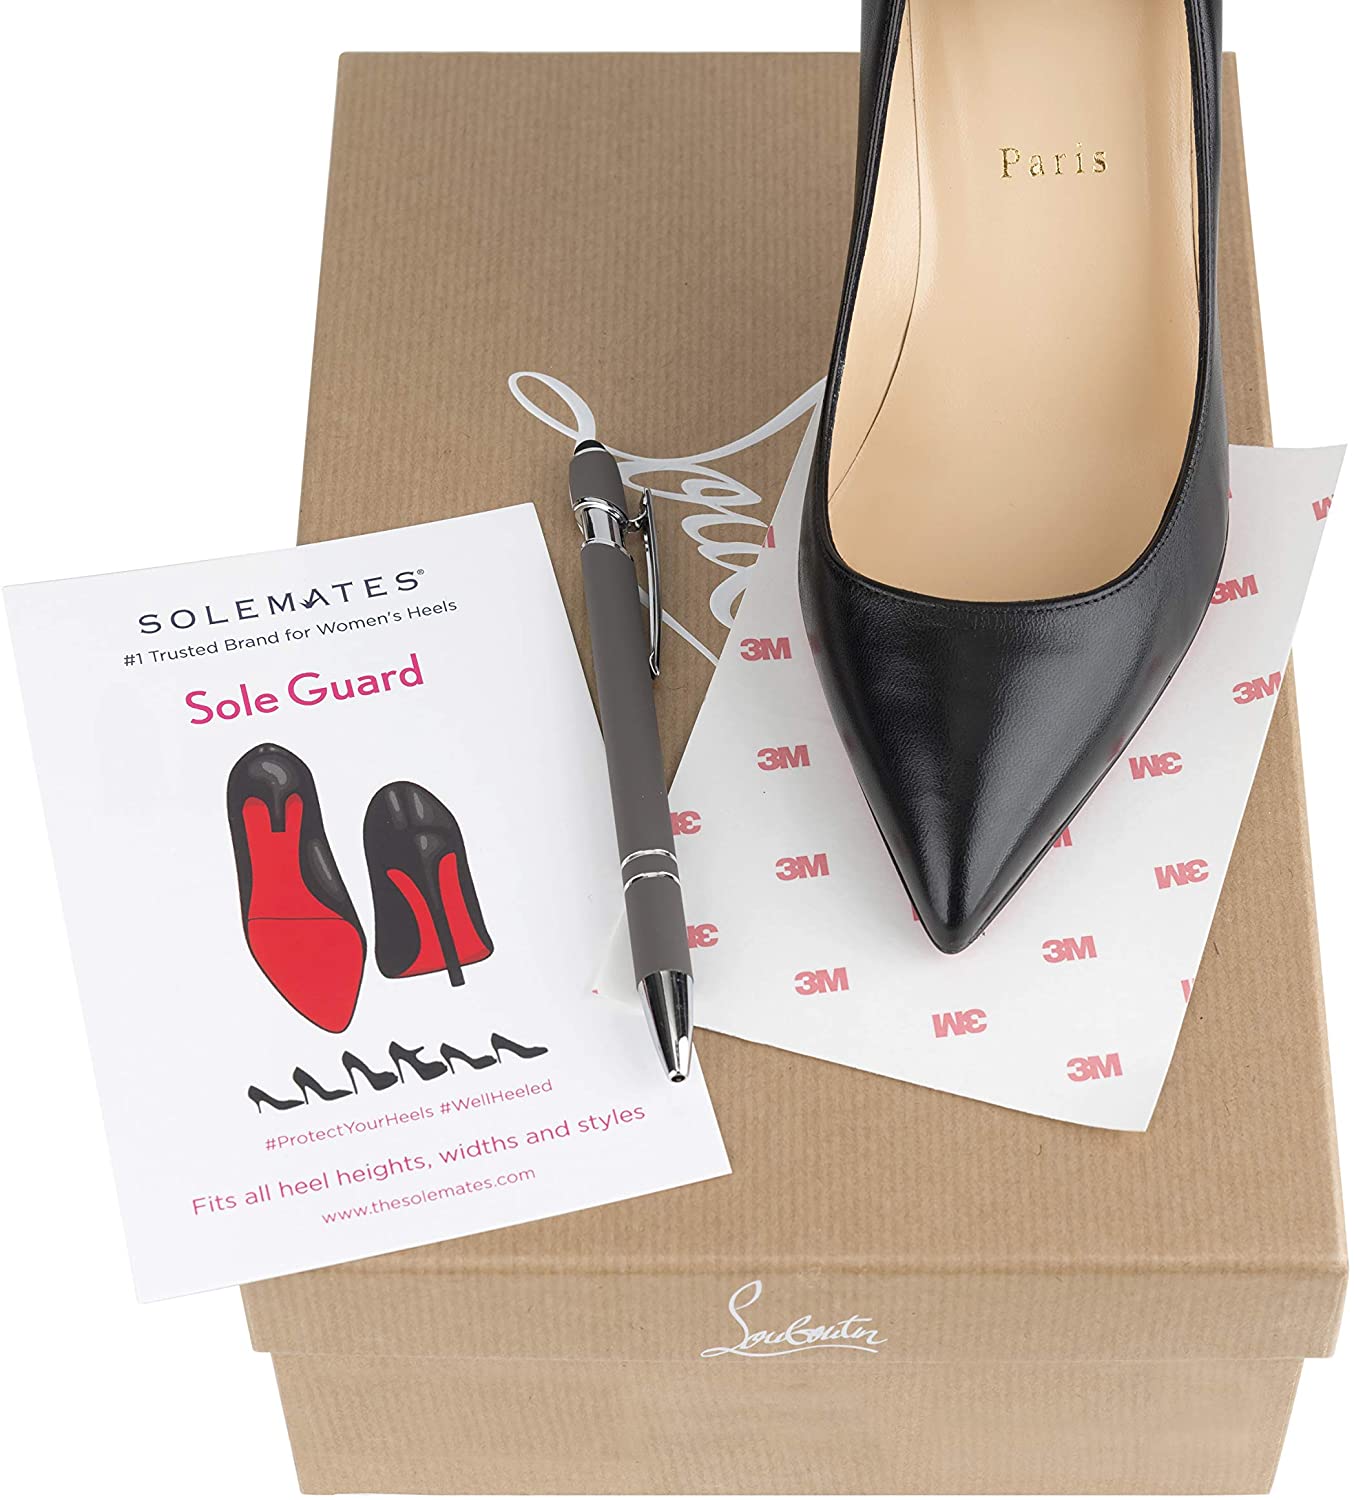 Sole Savior- (3 PAIR!) Compatible Louboutin Sole Protector for Christian  Louboutin Shoes, Red Bottom Protectors for Luxury Shoes- Christian  Louboutin